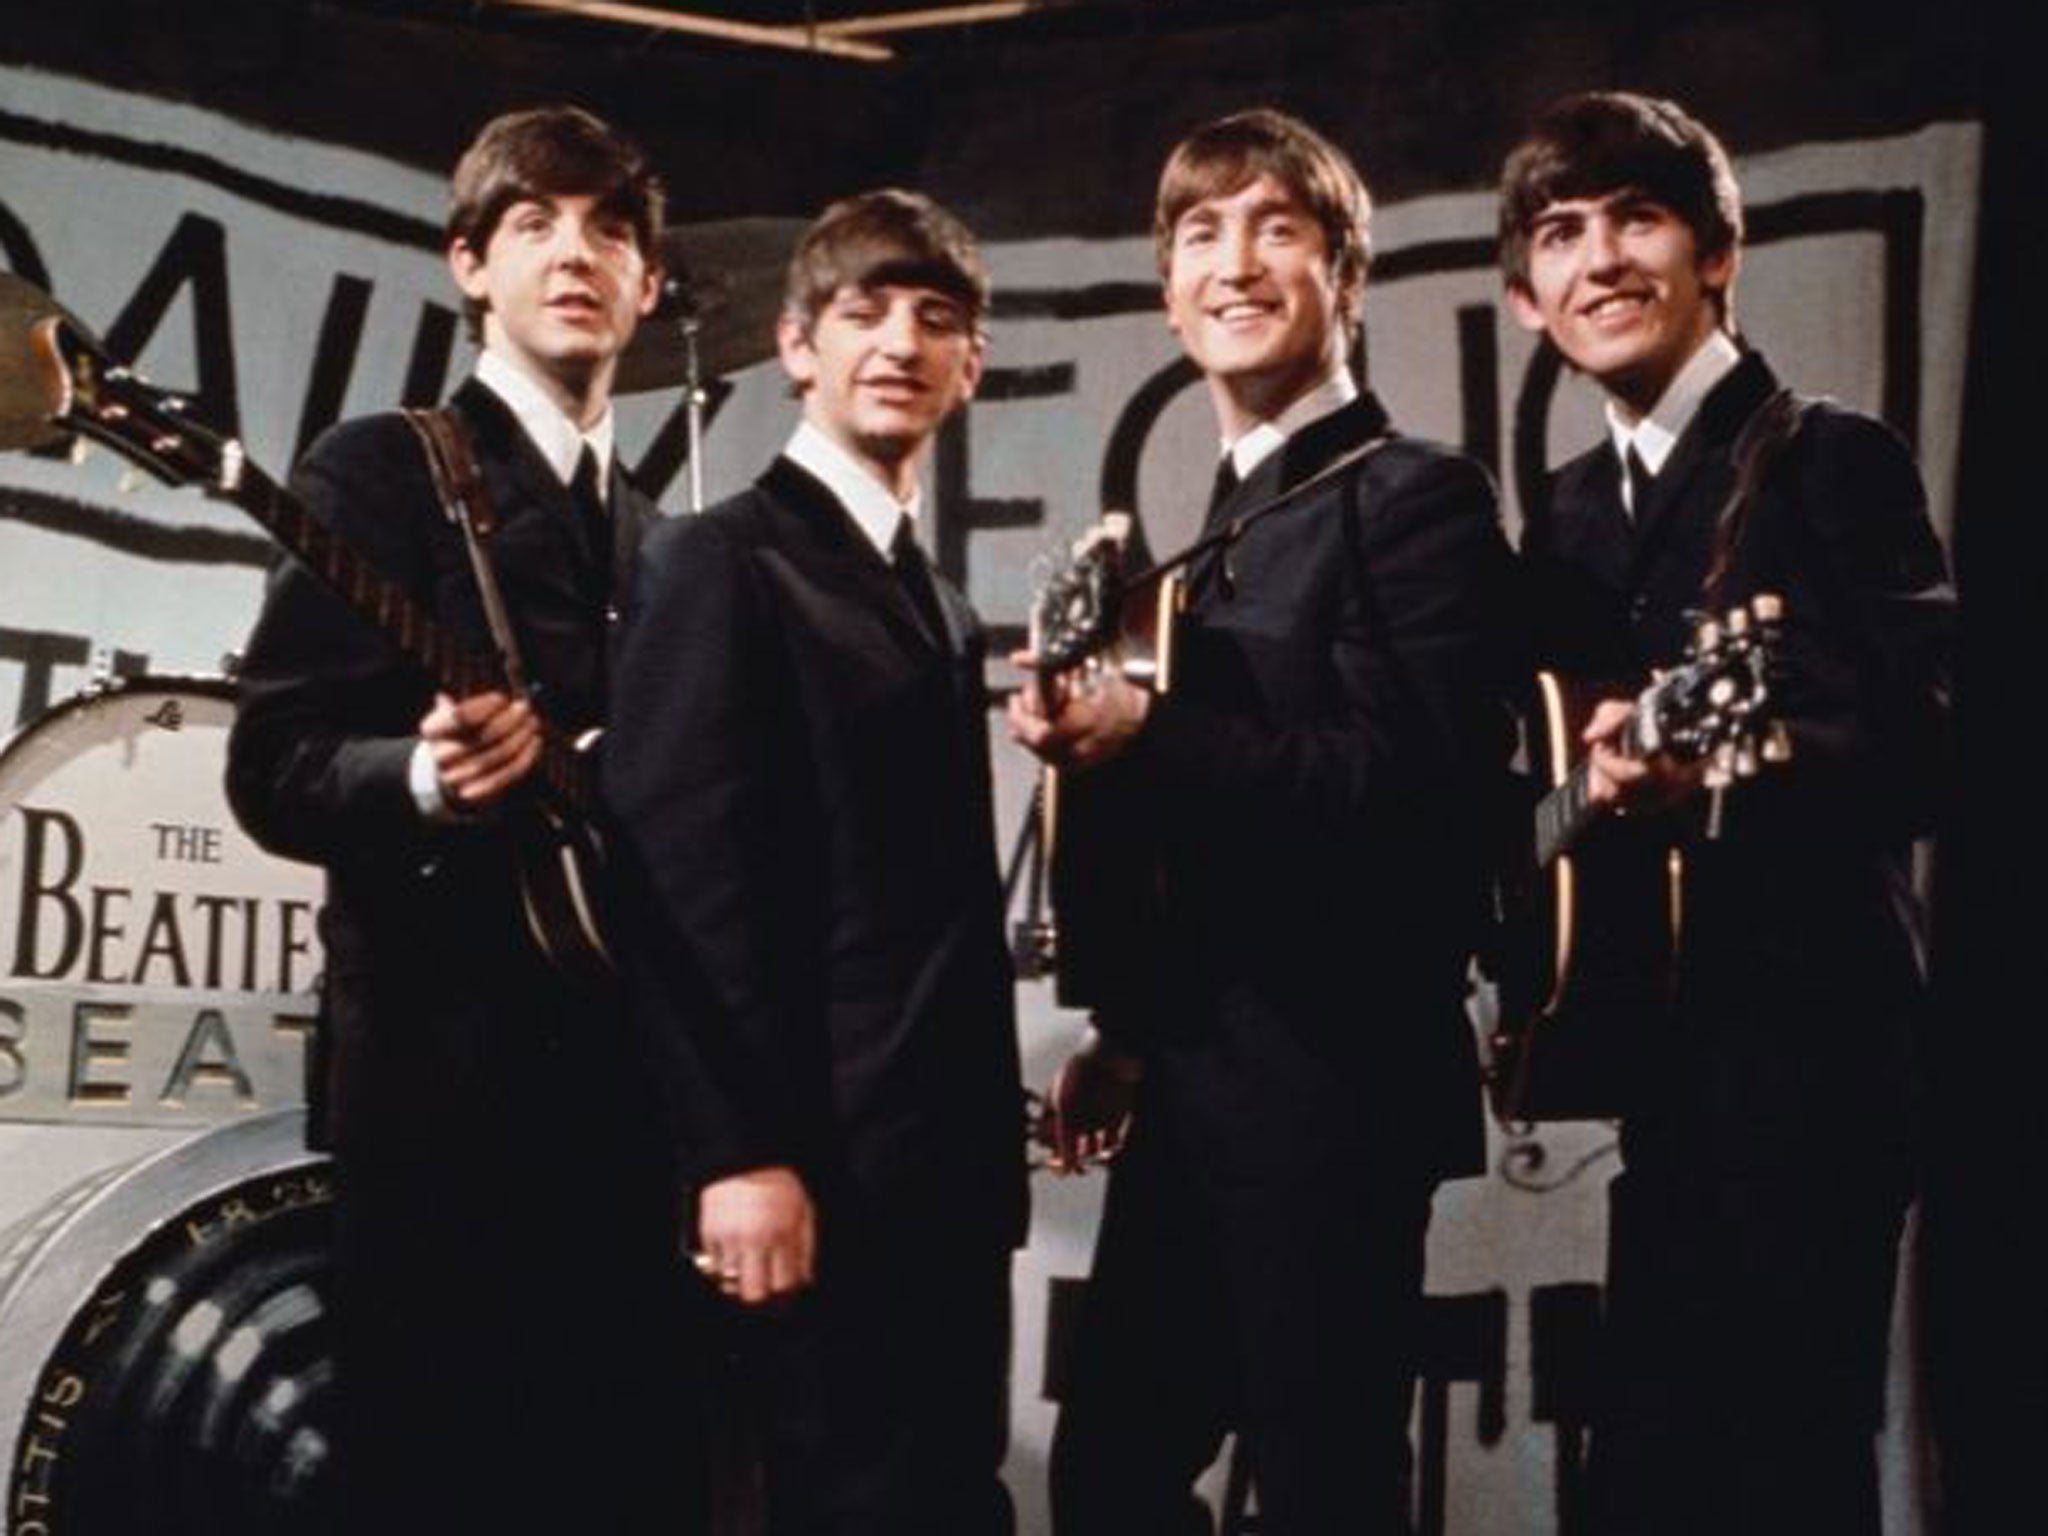 The Beatles made it into The Feeling's 12-minute medley of British rock’s greatest achievements